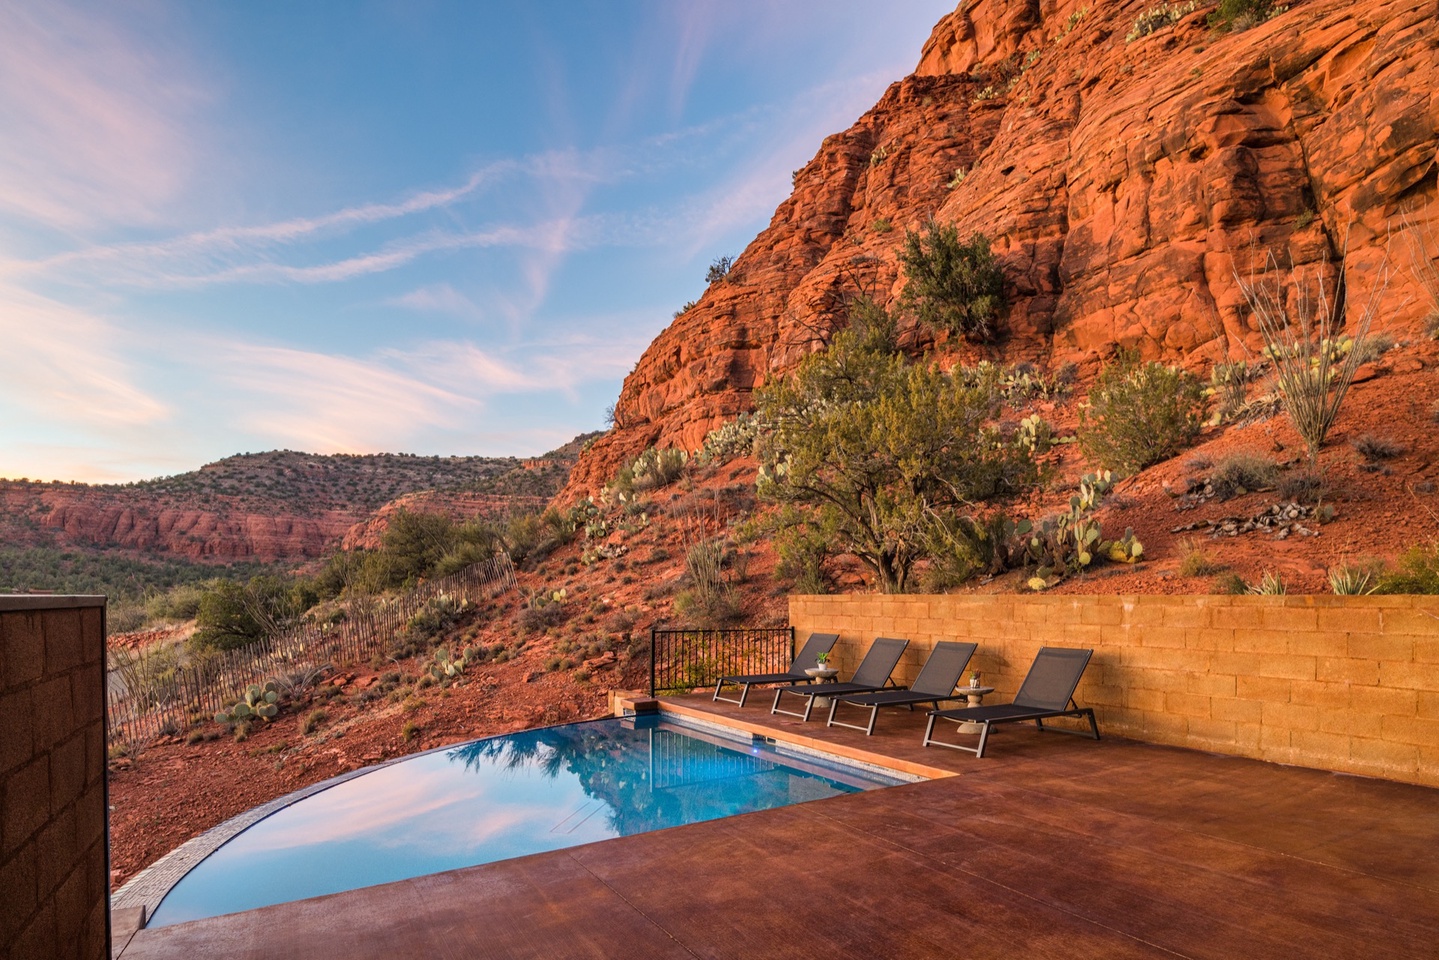 Heated* pool with unforgettable valley-wide views